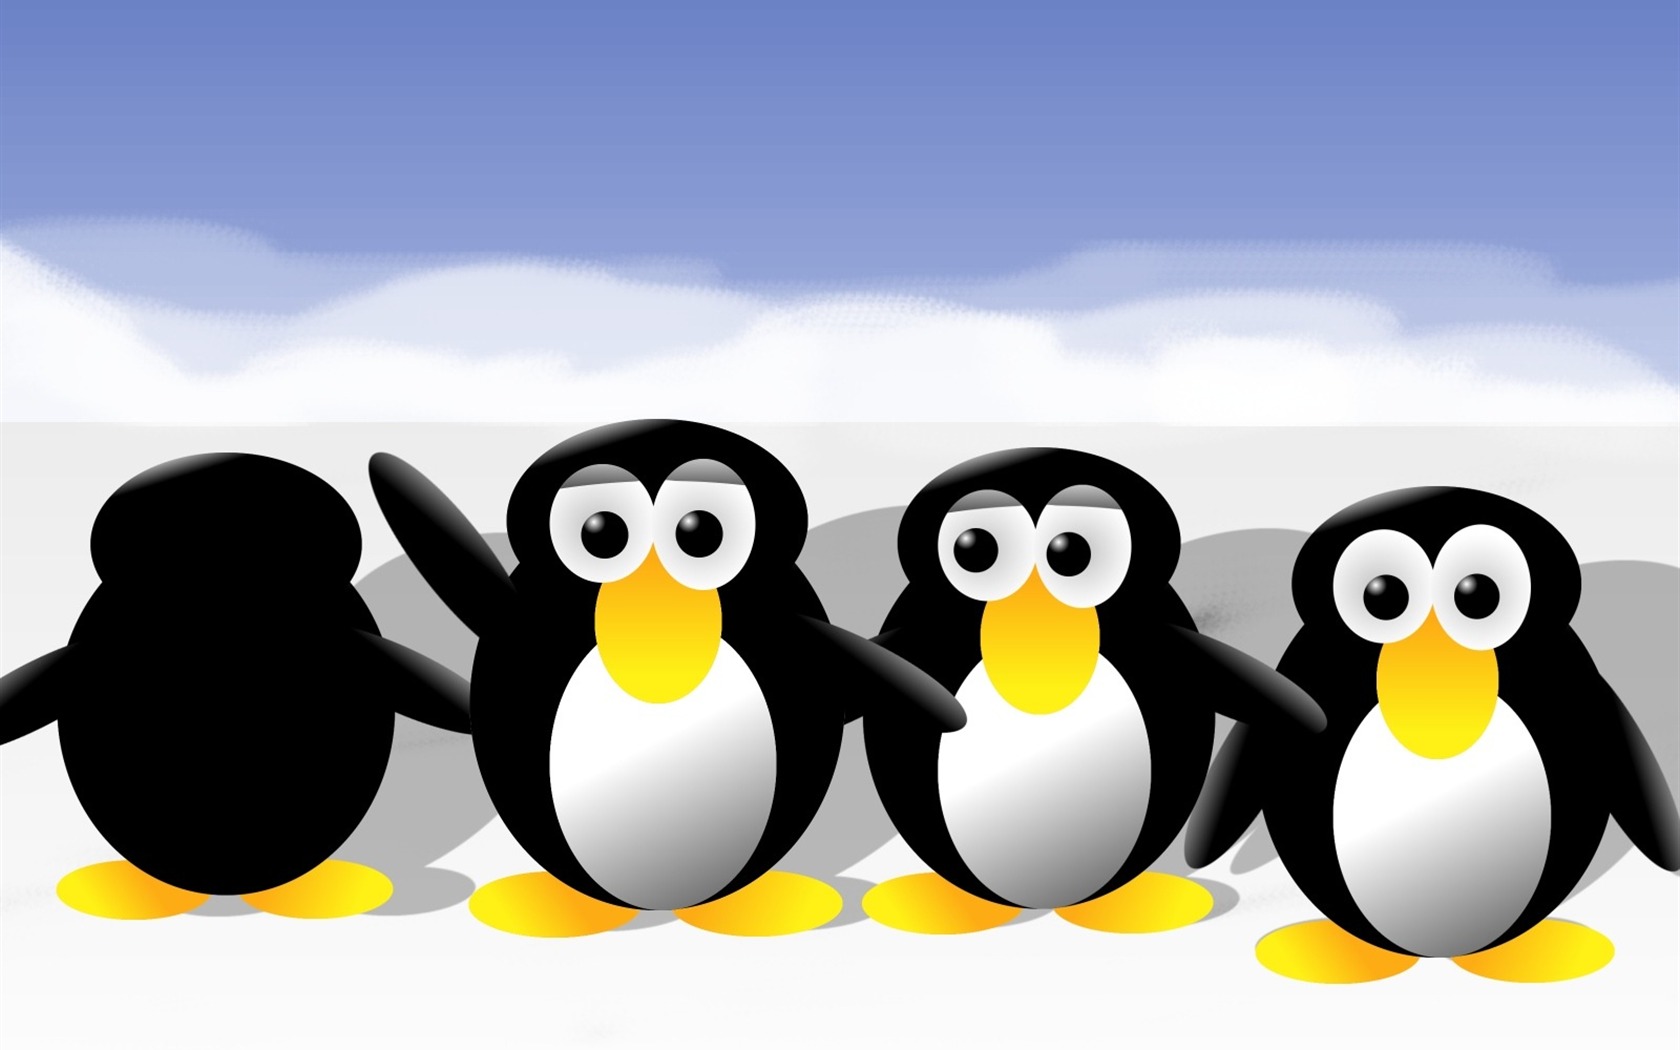 Linux tapety (1) #1 - 1680x1050